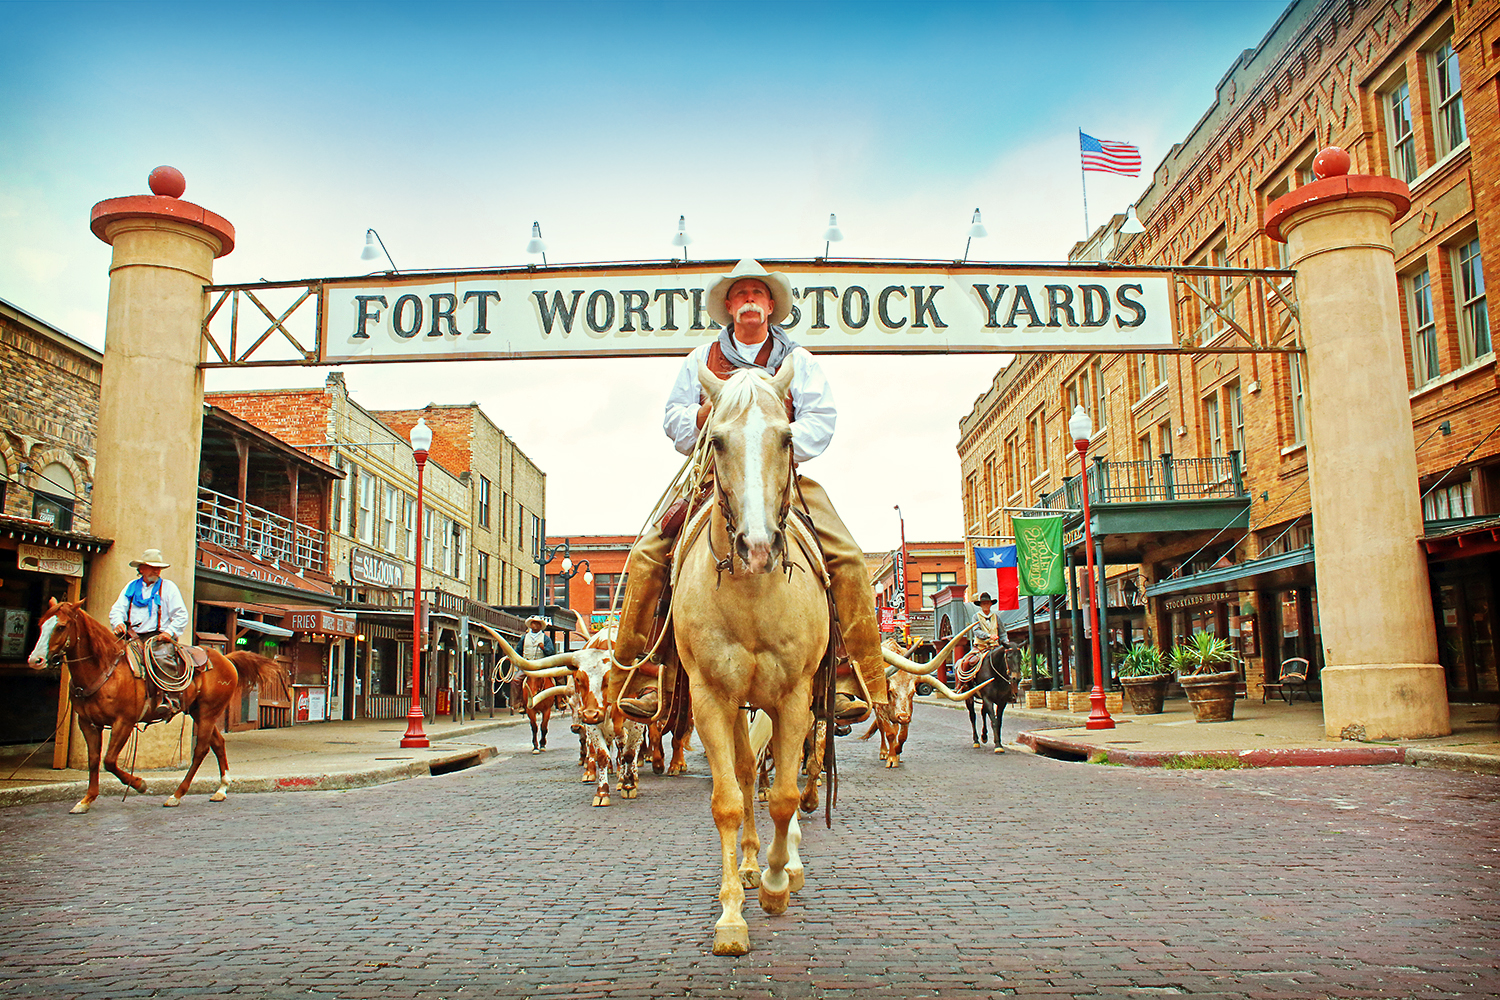 Fort Worth Stockyard cowboy in front of sign